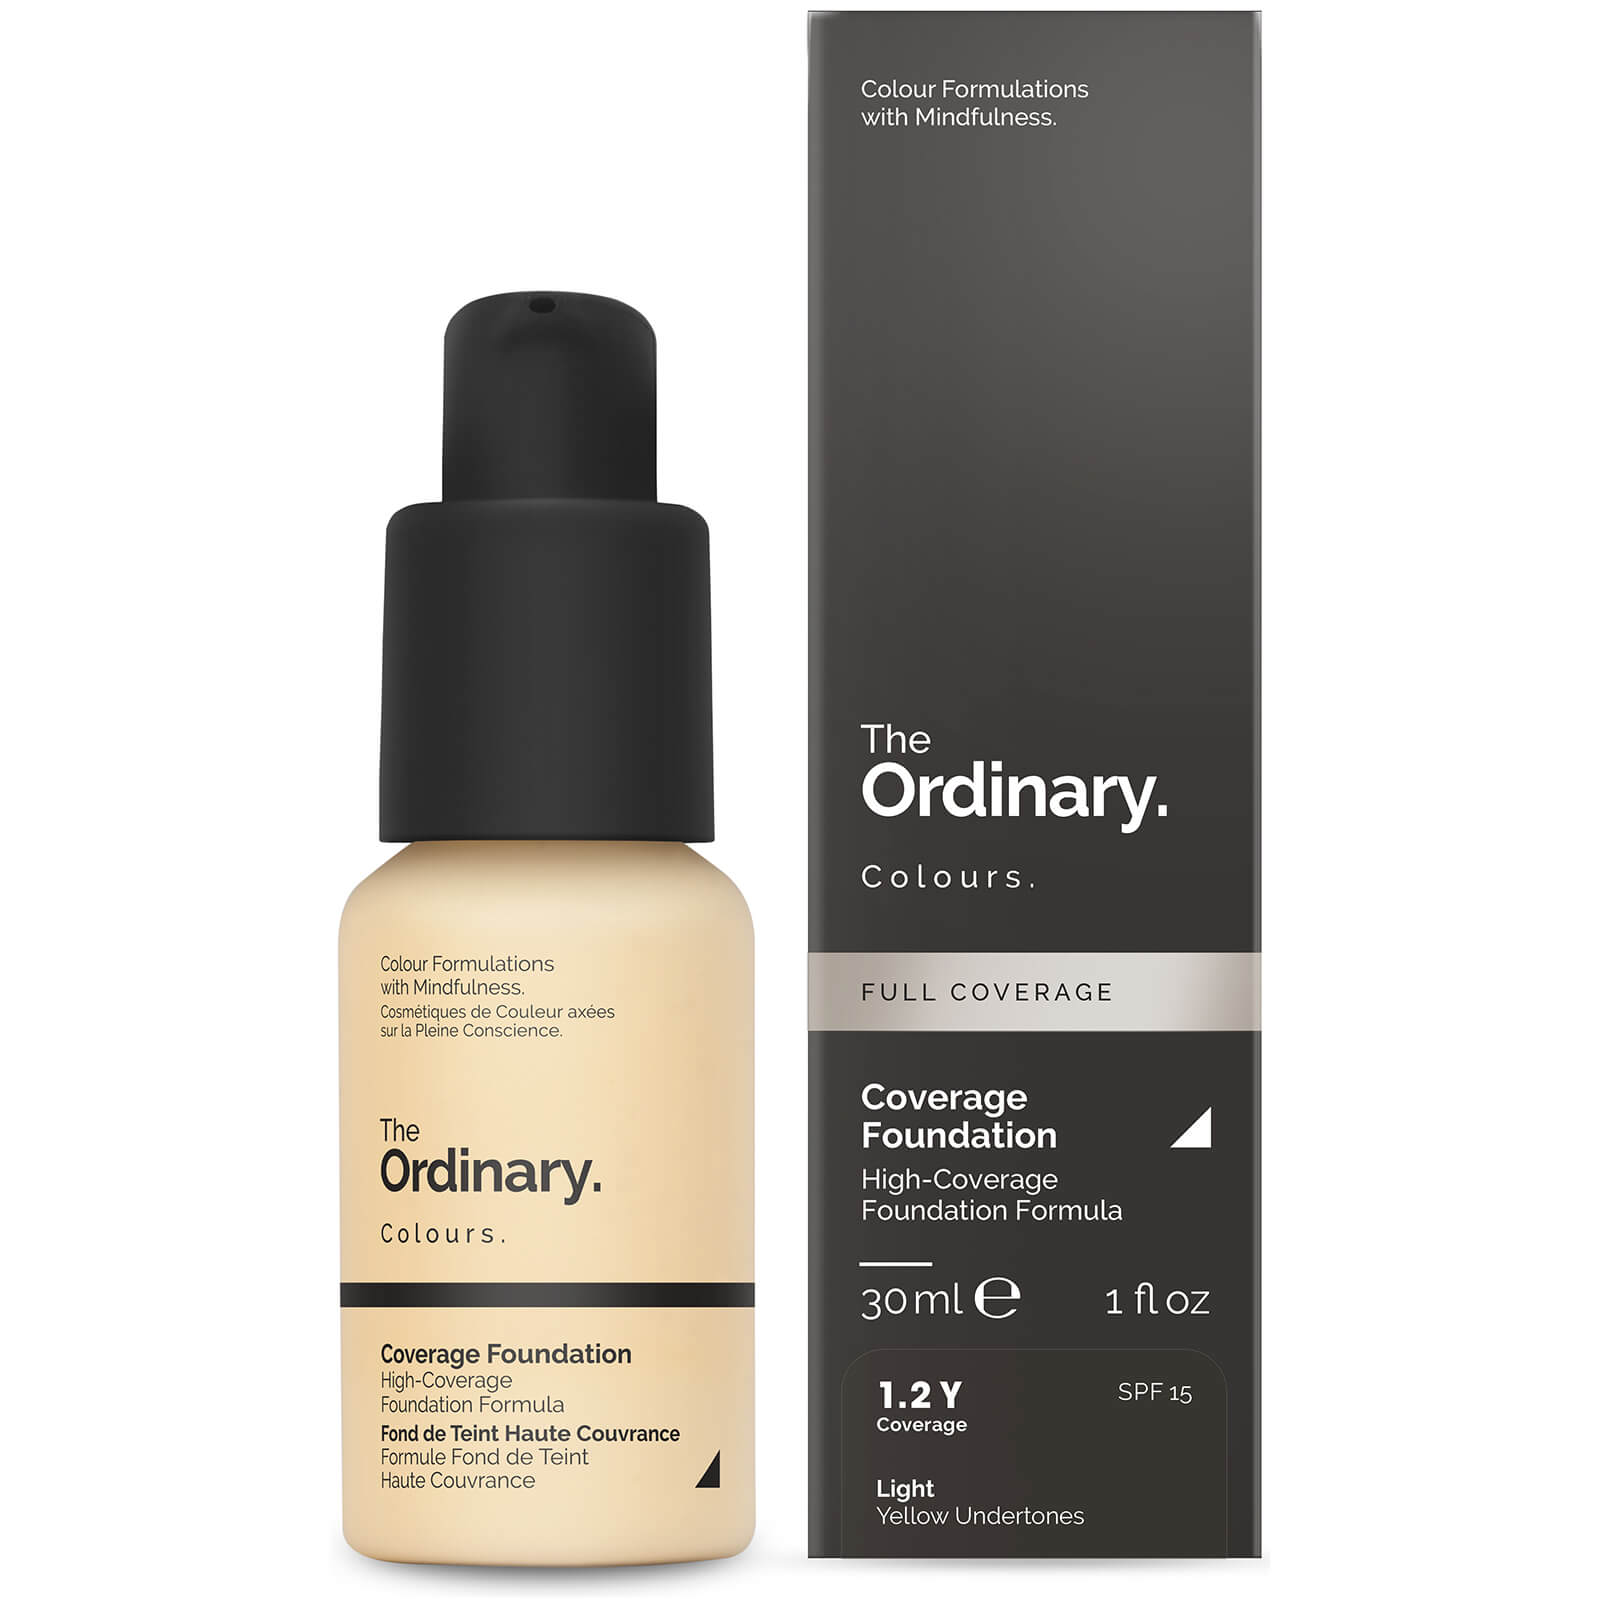 The Ordinary Coverage Foundation with SPF 15 by The Ordinary Colours 30ml (Various Shades) - 1.2Y